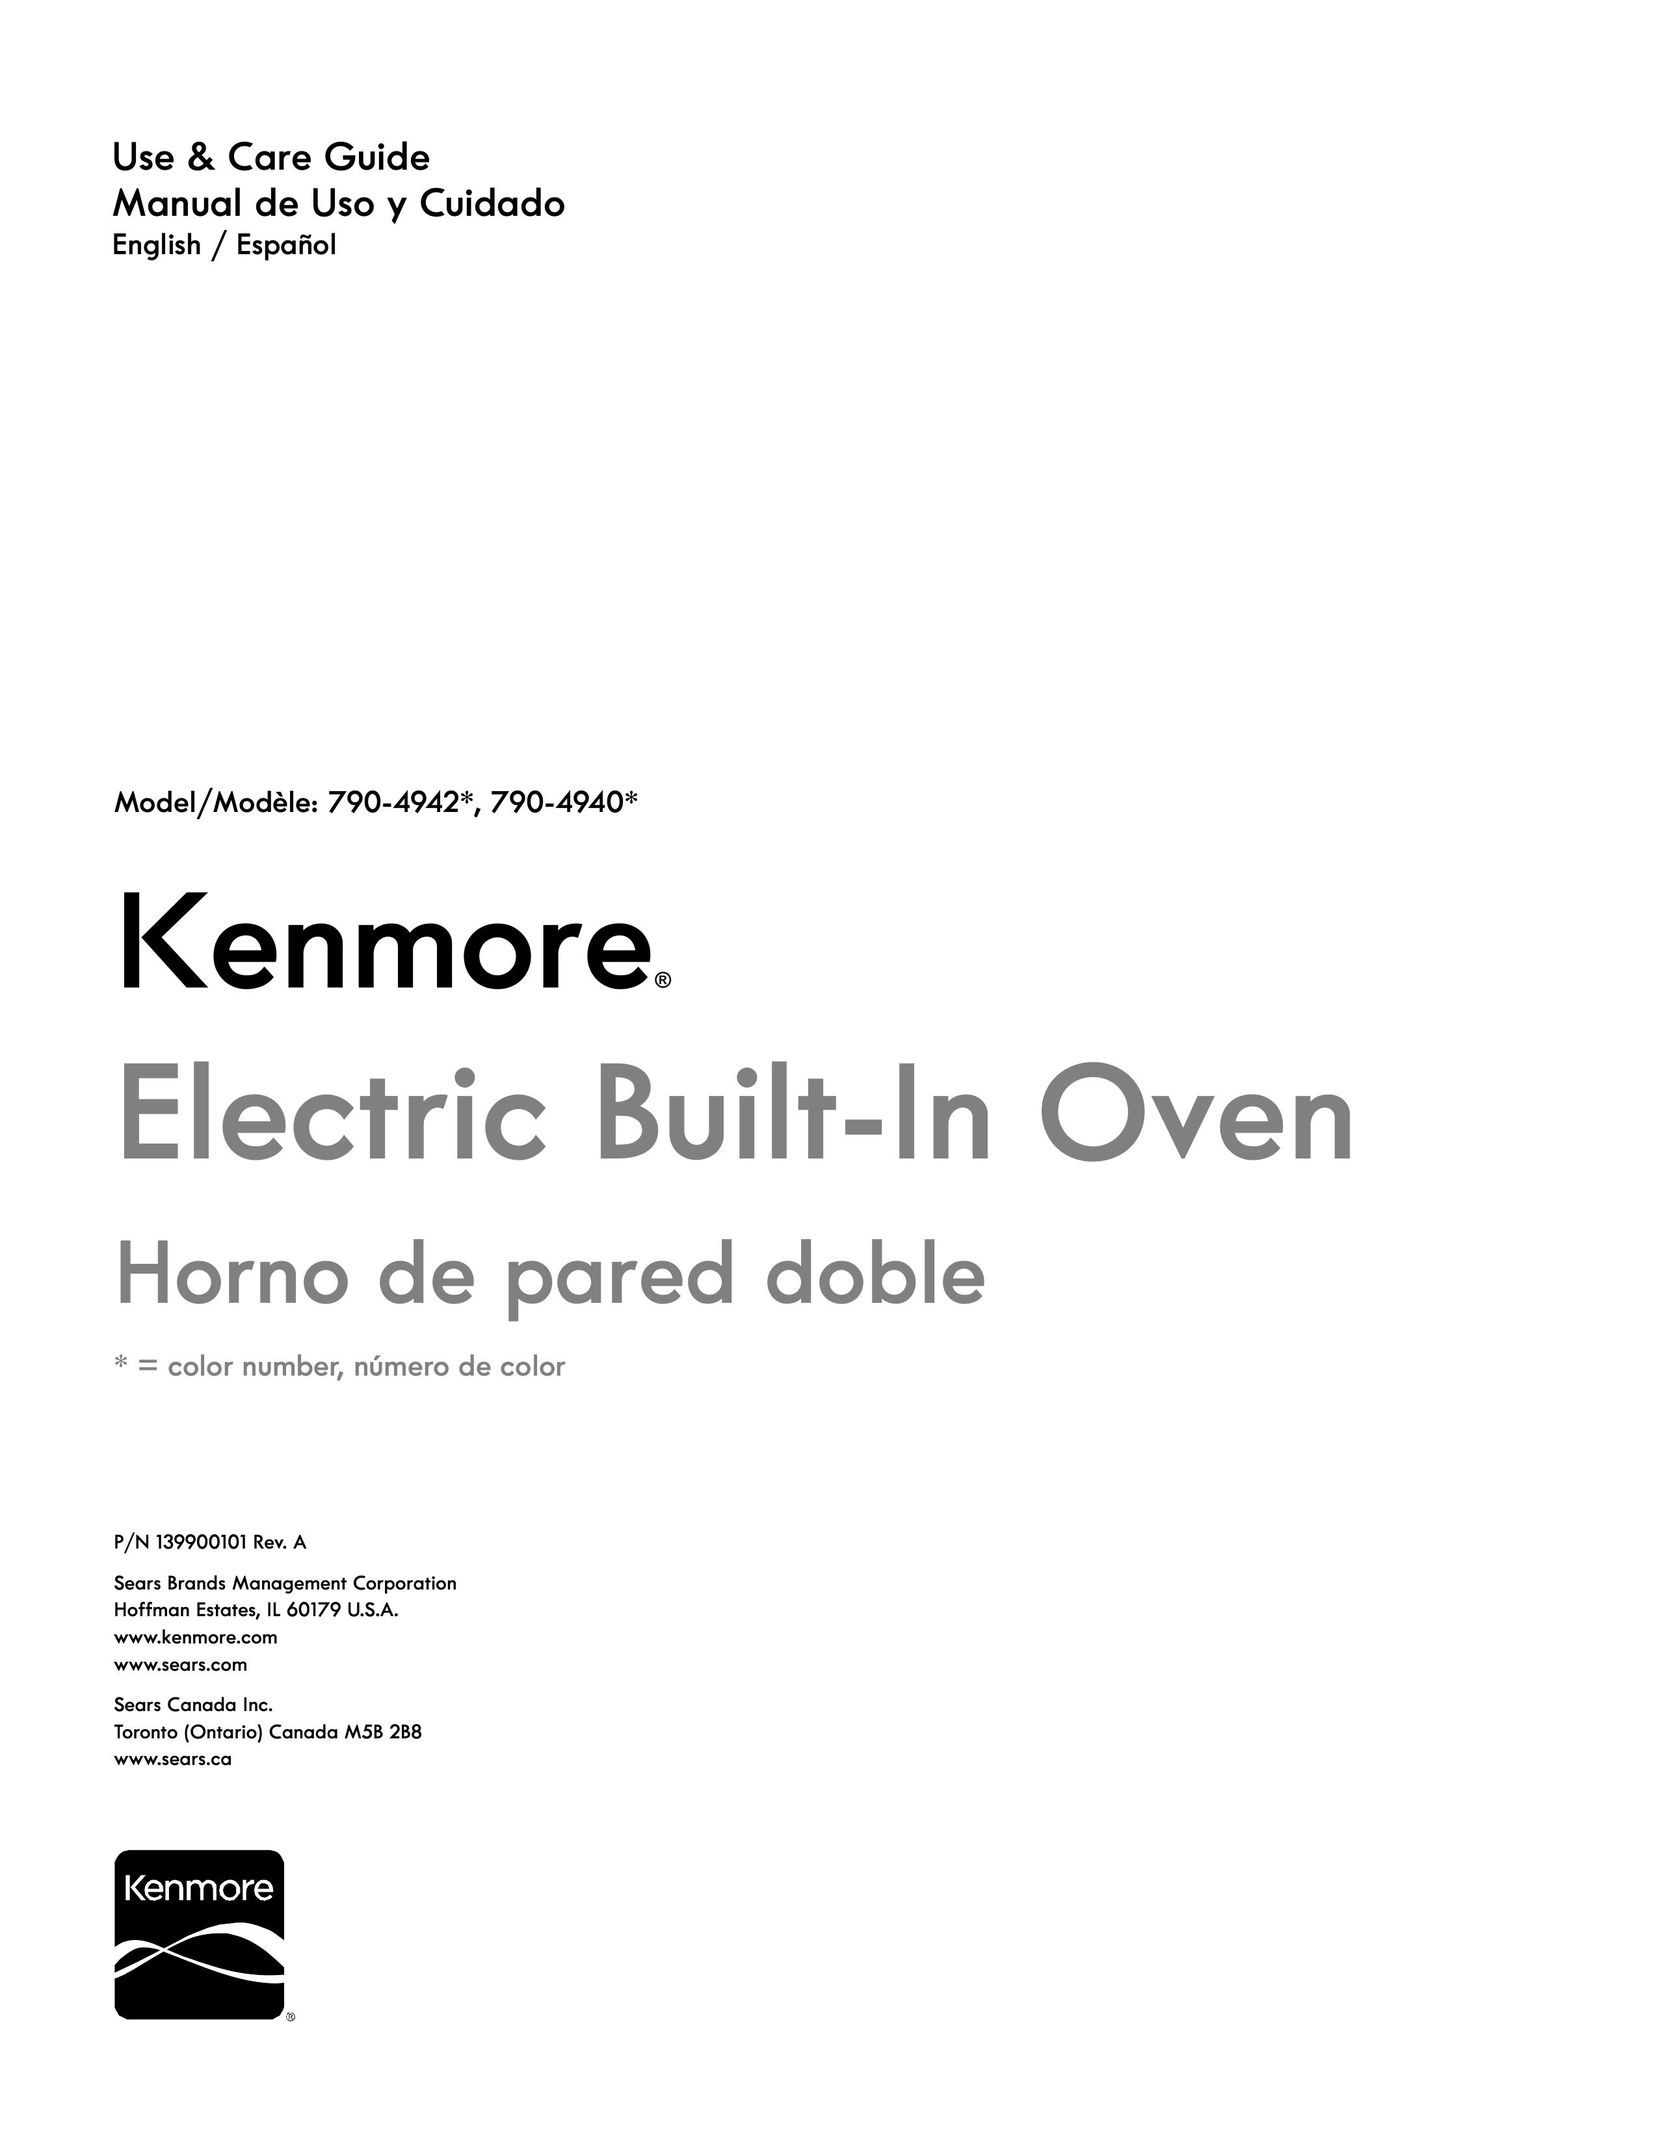 Kenmore 790-4940 Convection Oven User Manual